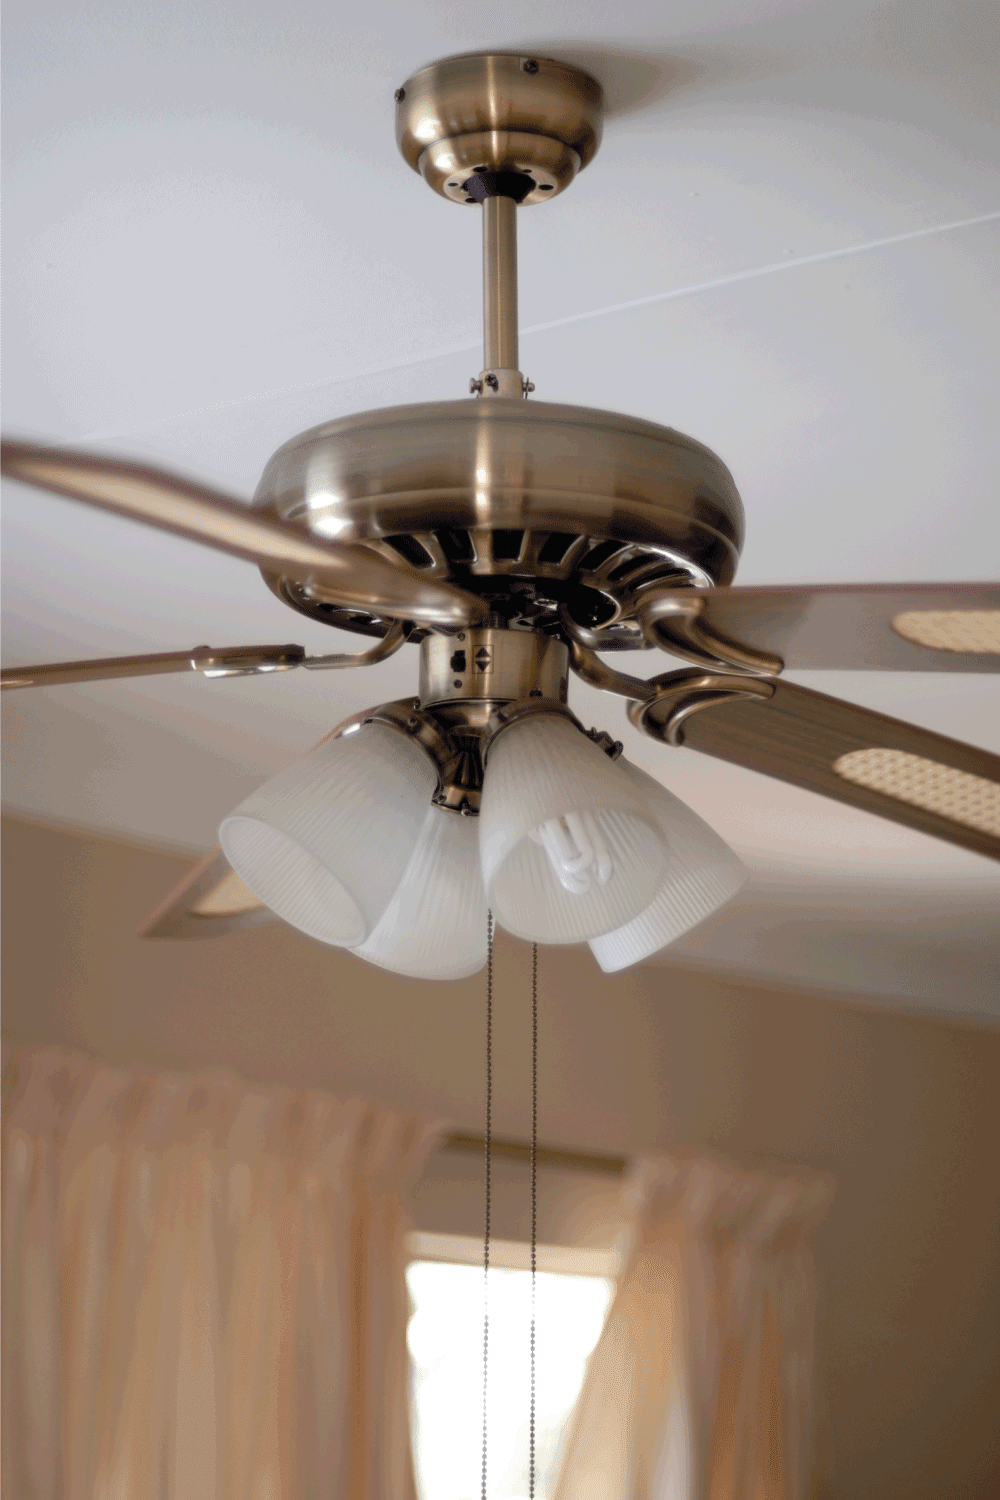 Household Ceiling Fan with chandelier lights